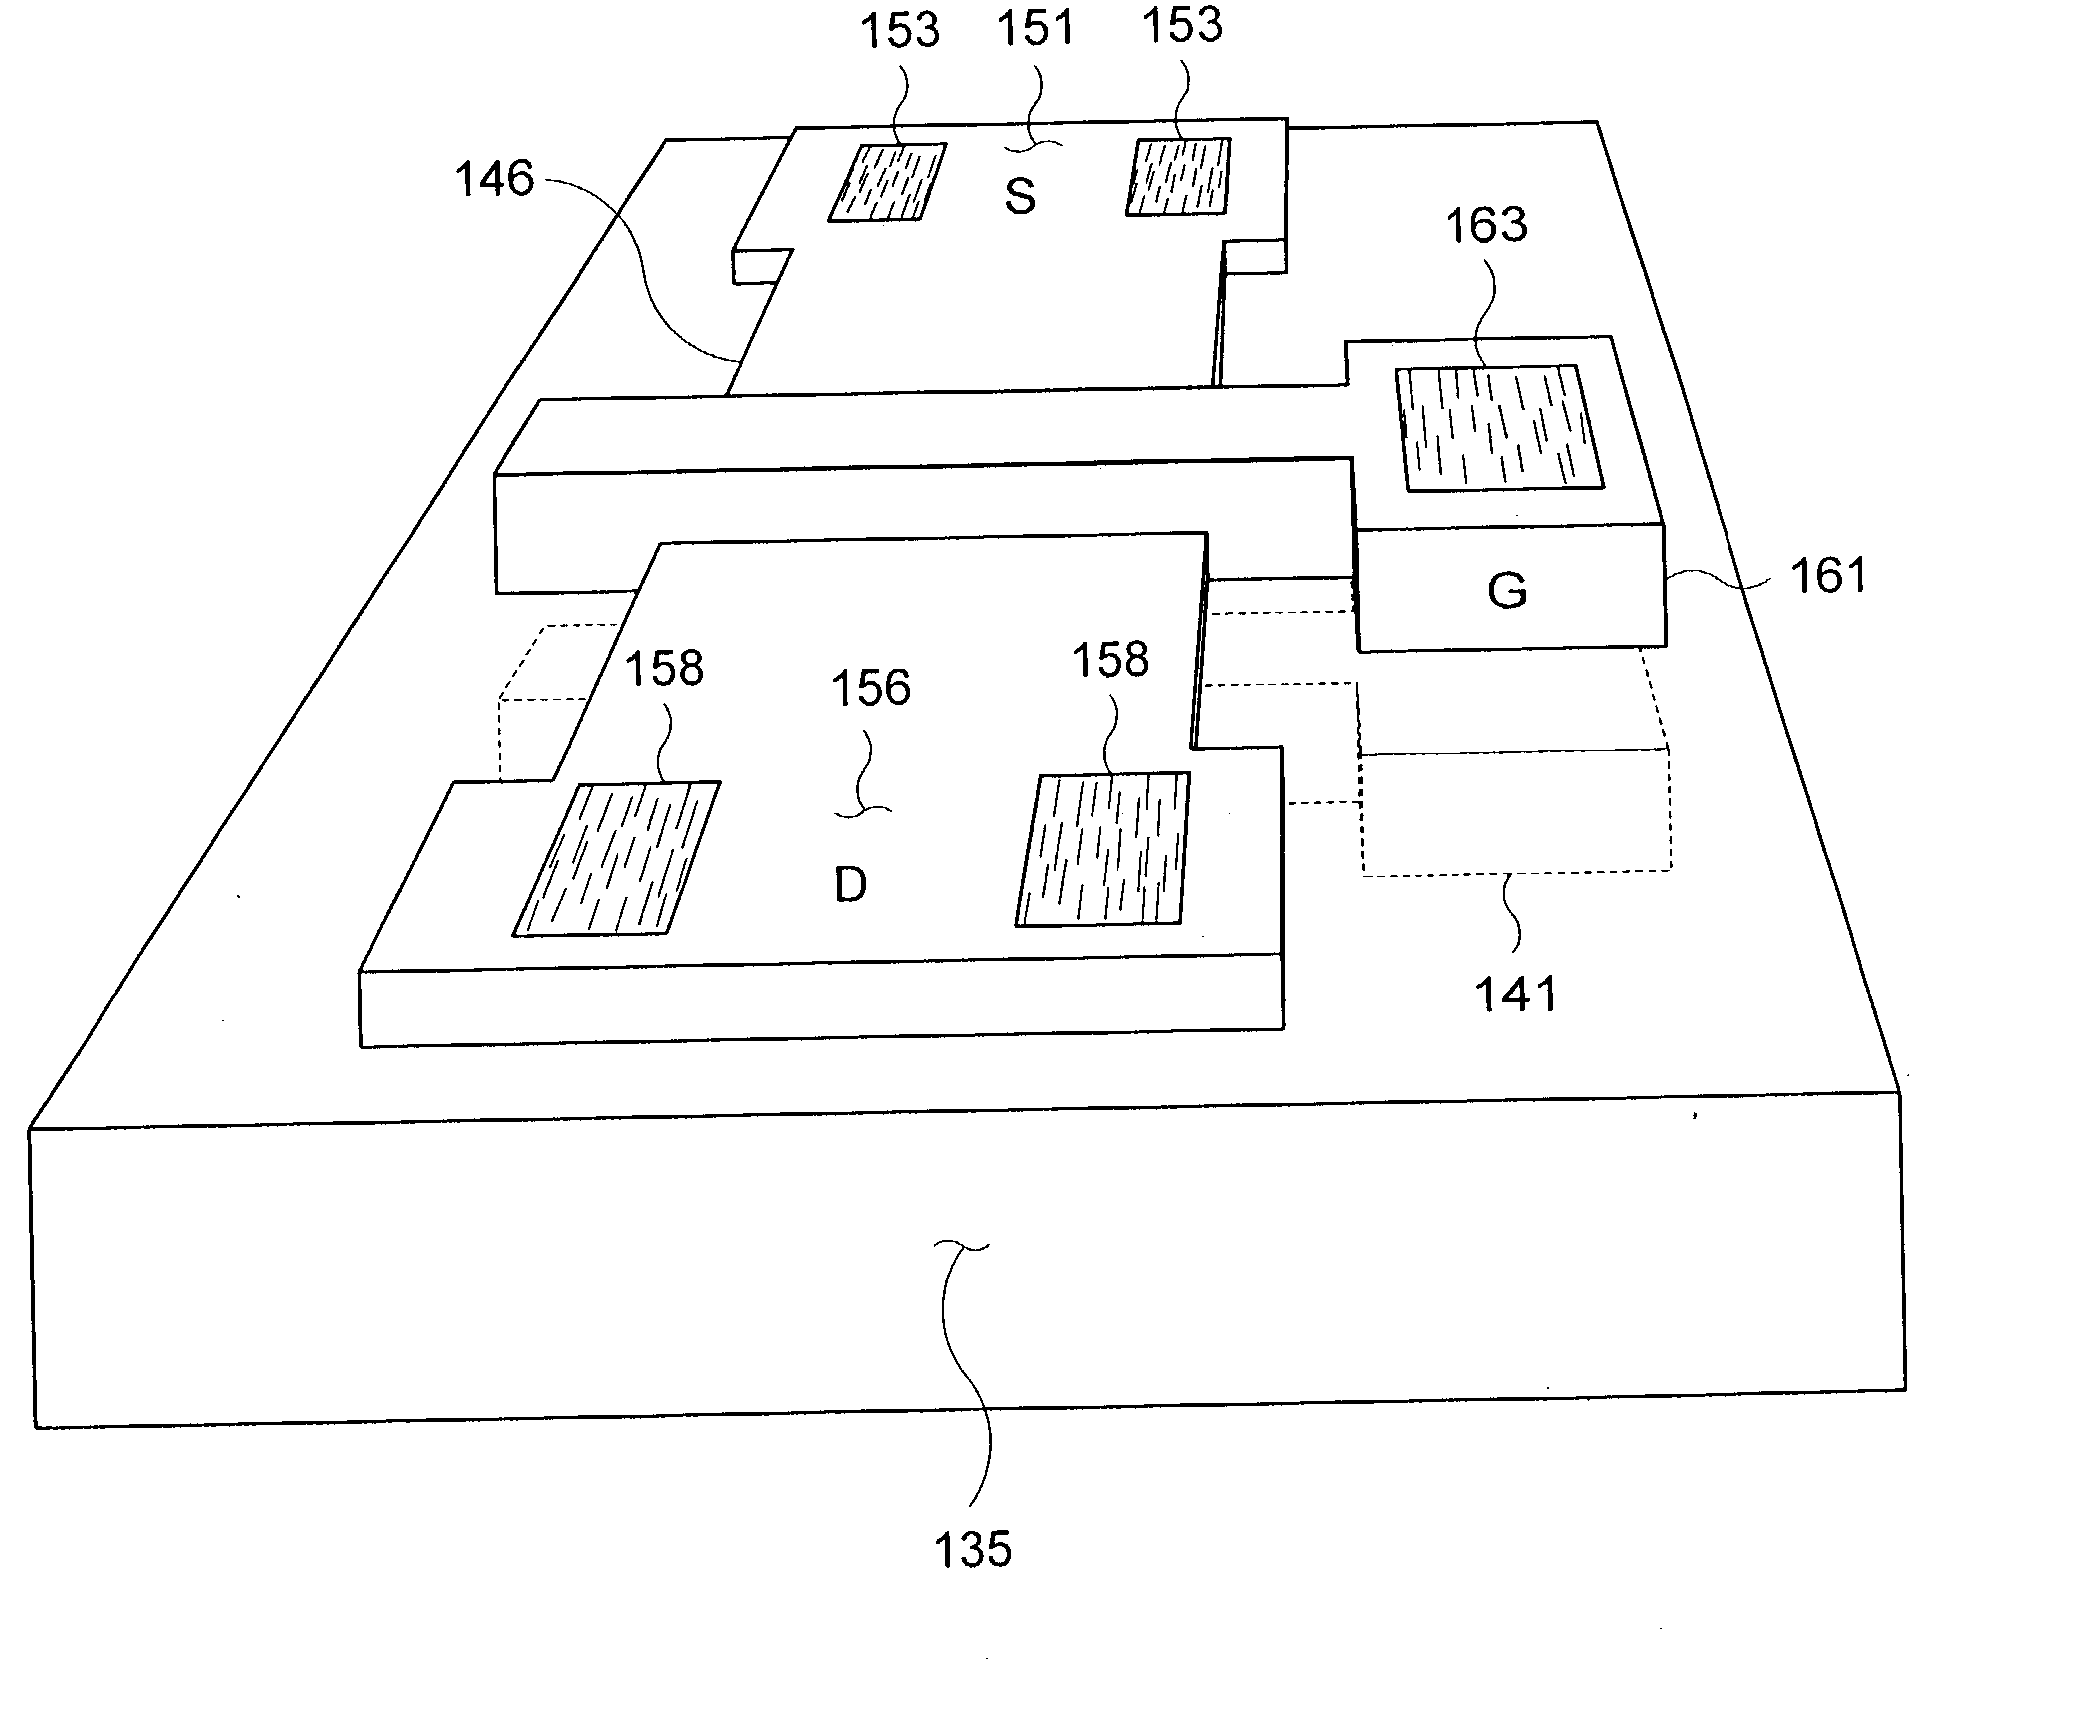 All-around MOSFET gate and methods of manufacture thereof